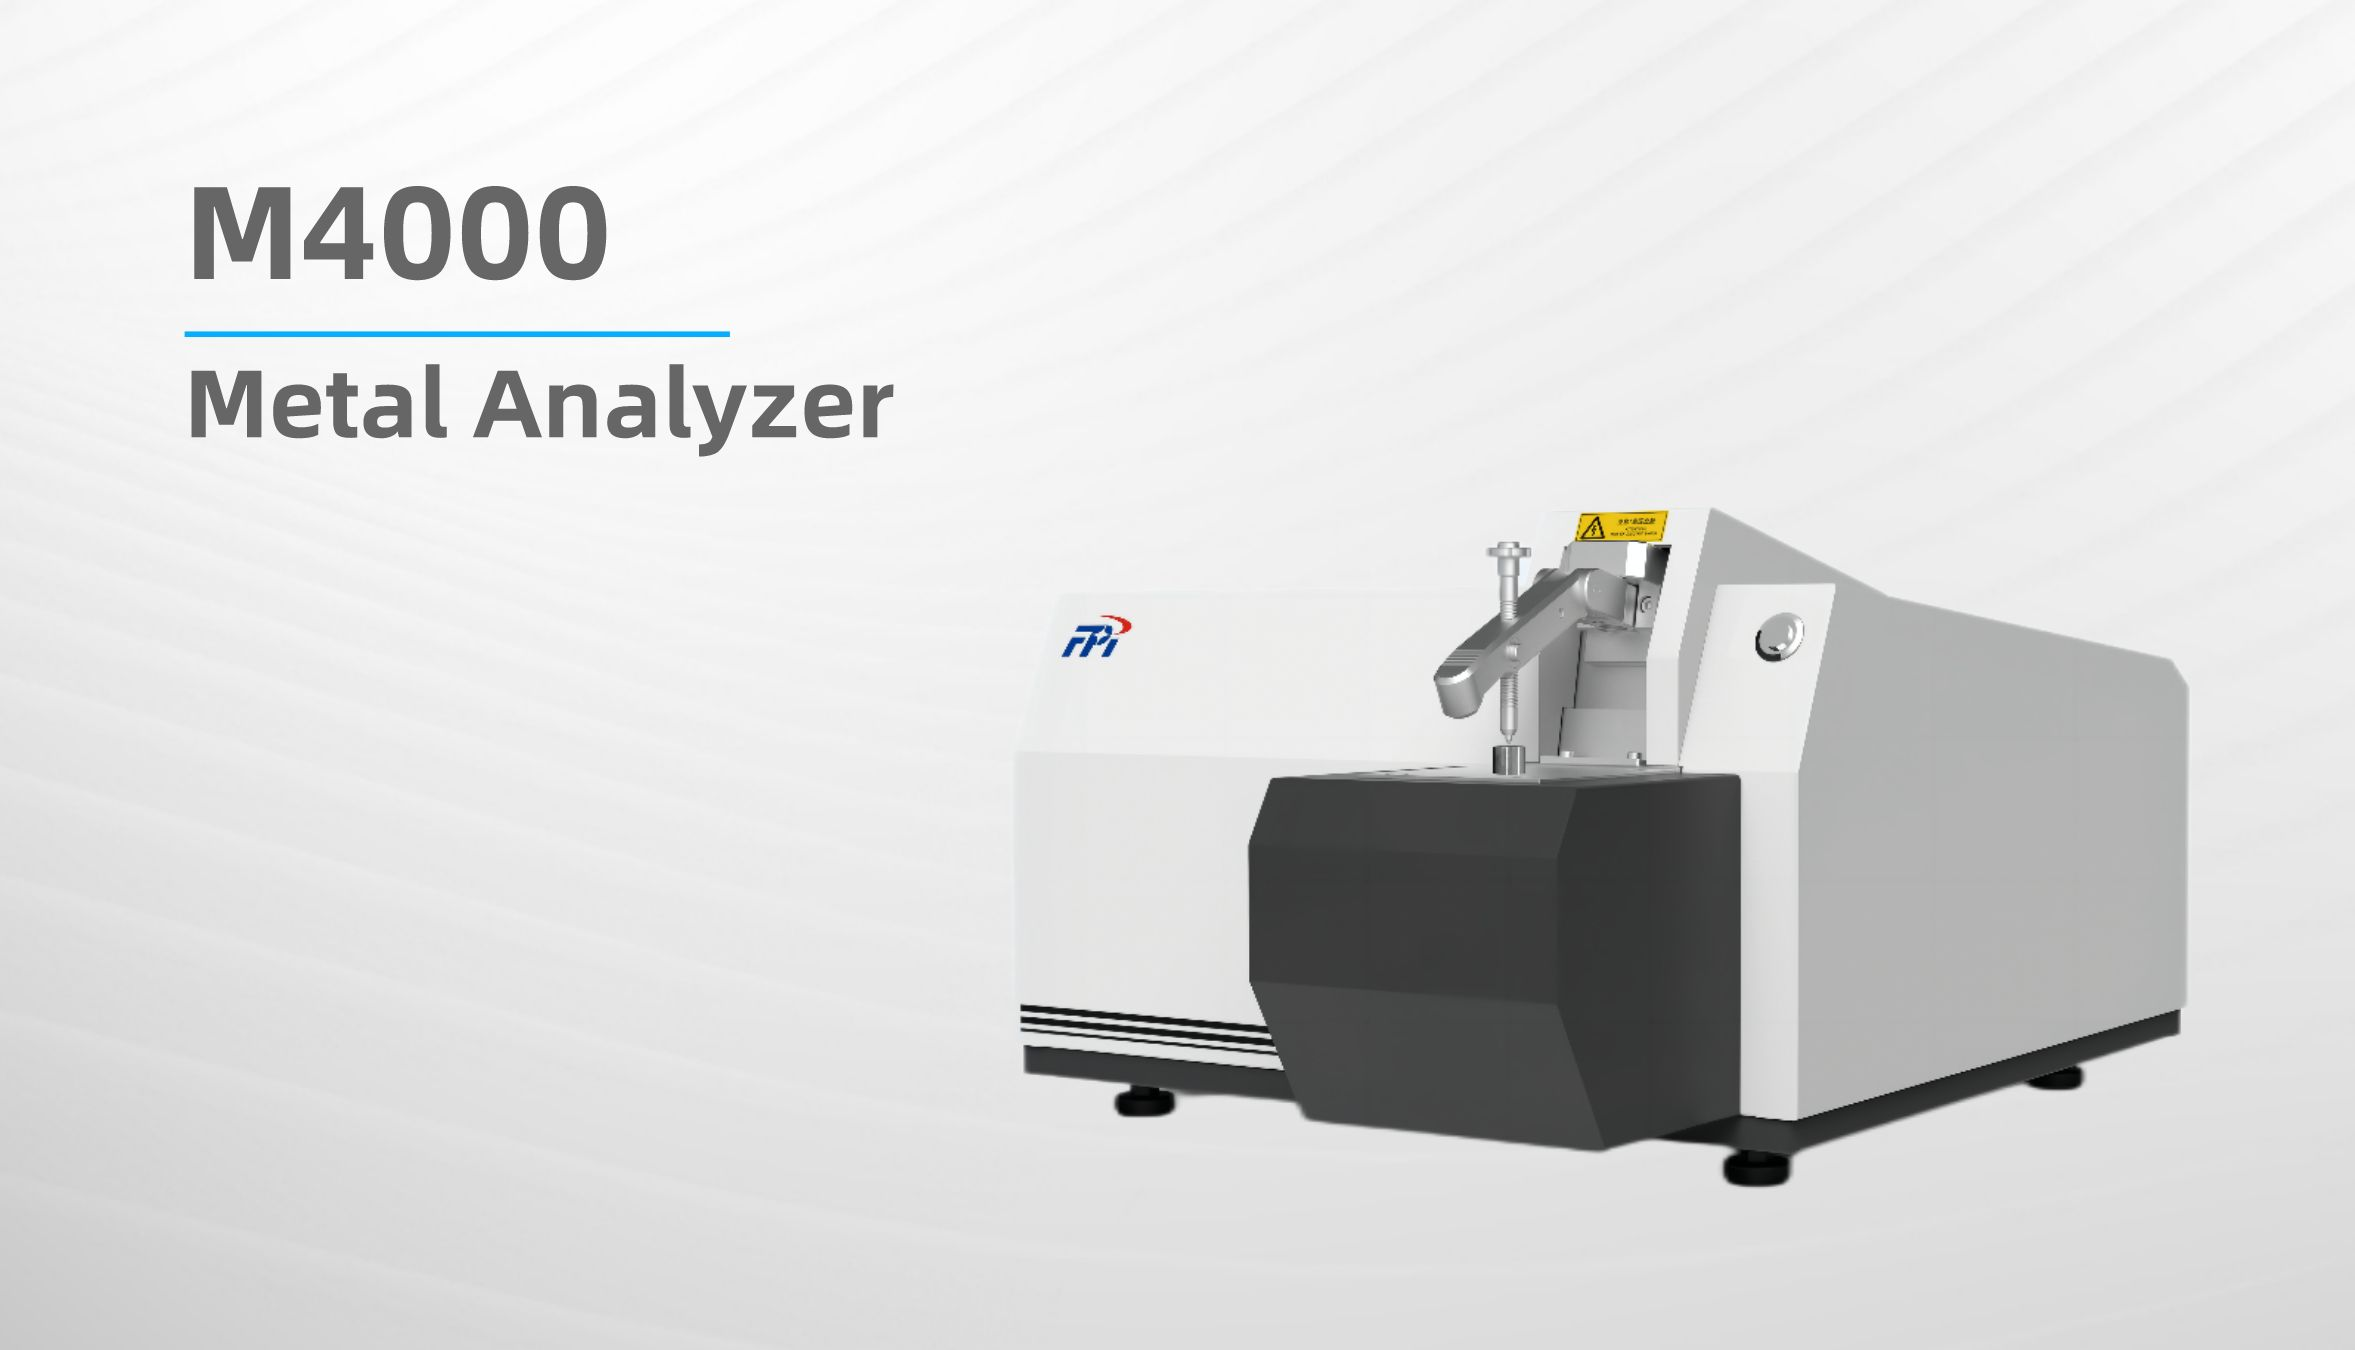 FPI's M4000 Metal Analyzer Won Gold Award in 2022 China Photoelectric Instrument Brand List！EXPEC-6500 ICP-OES Won Bronze Award！